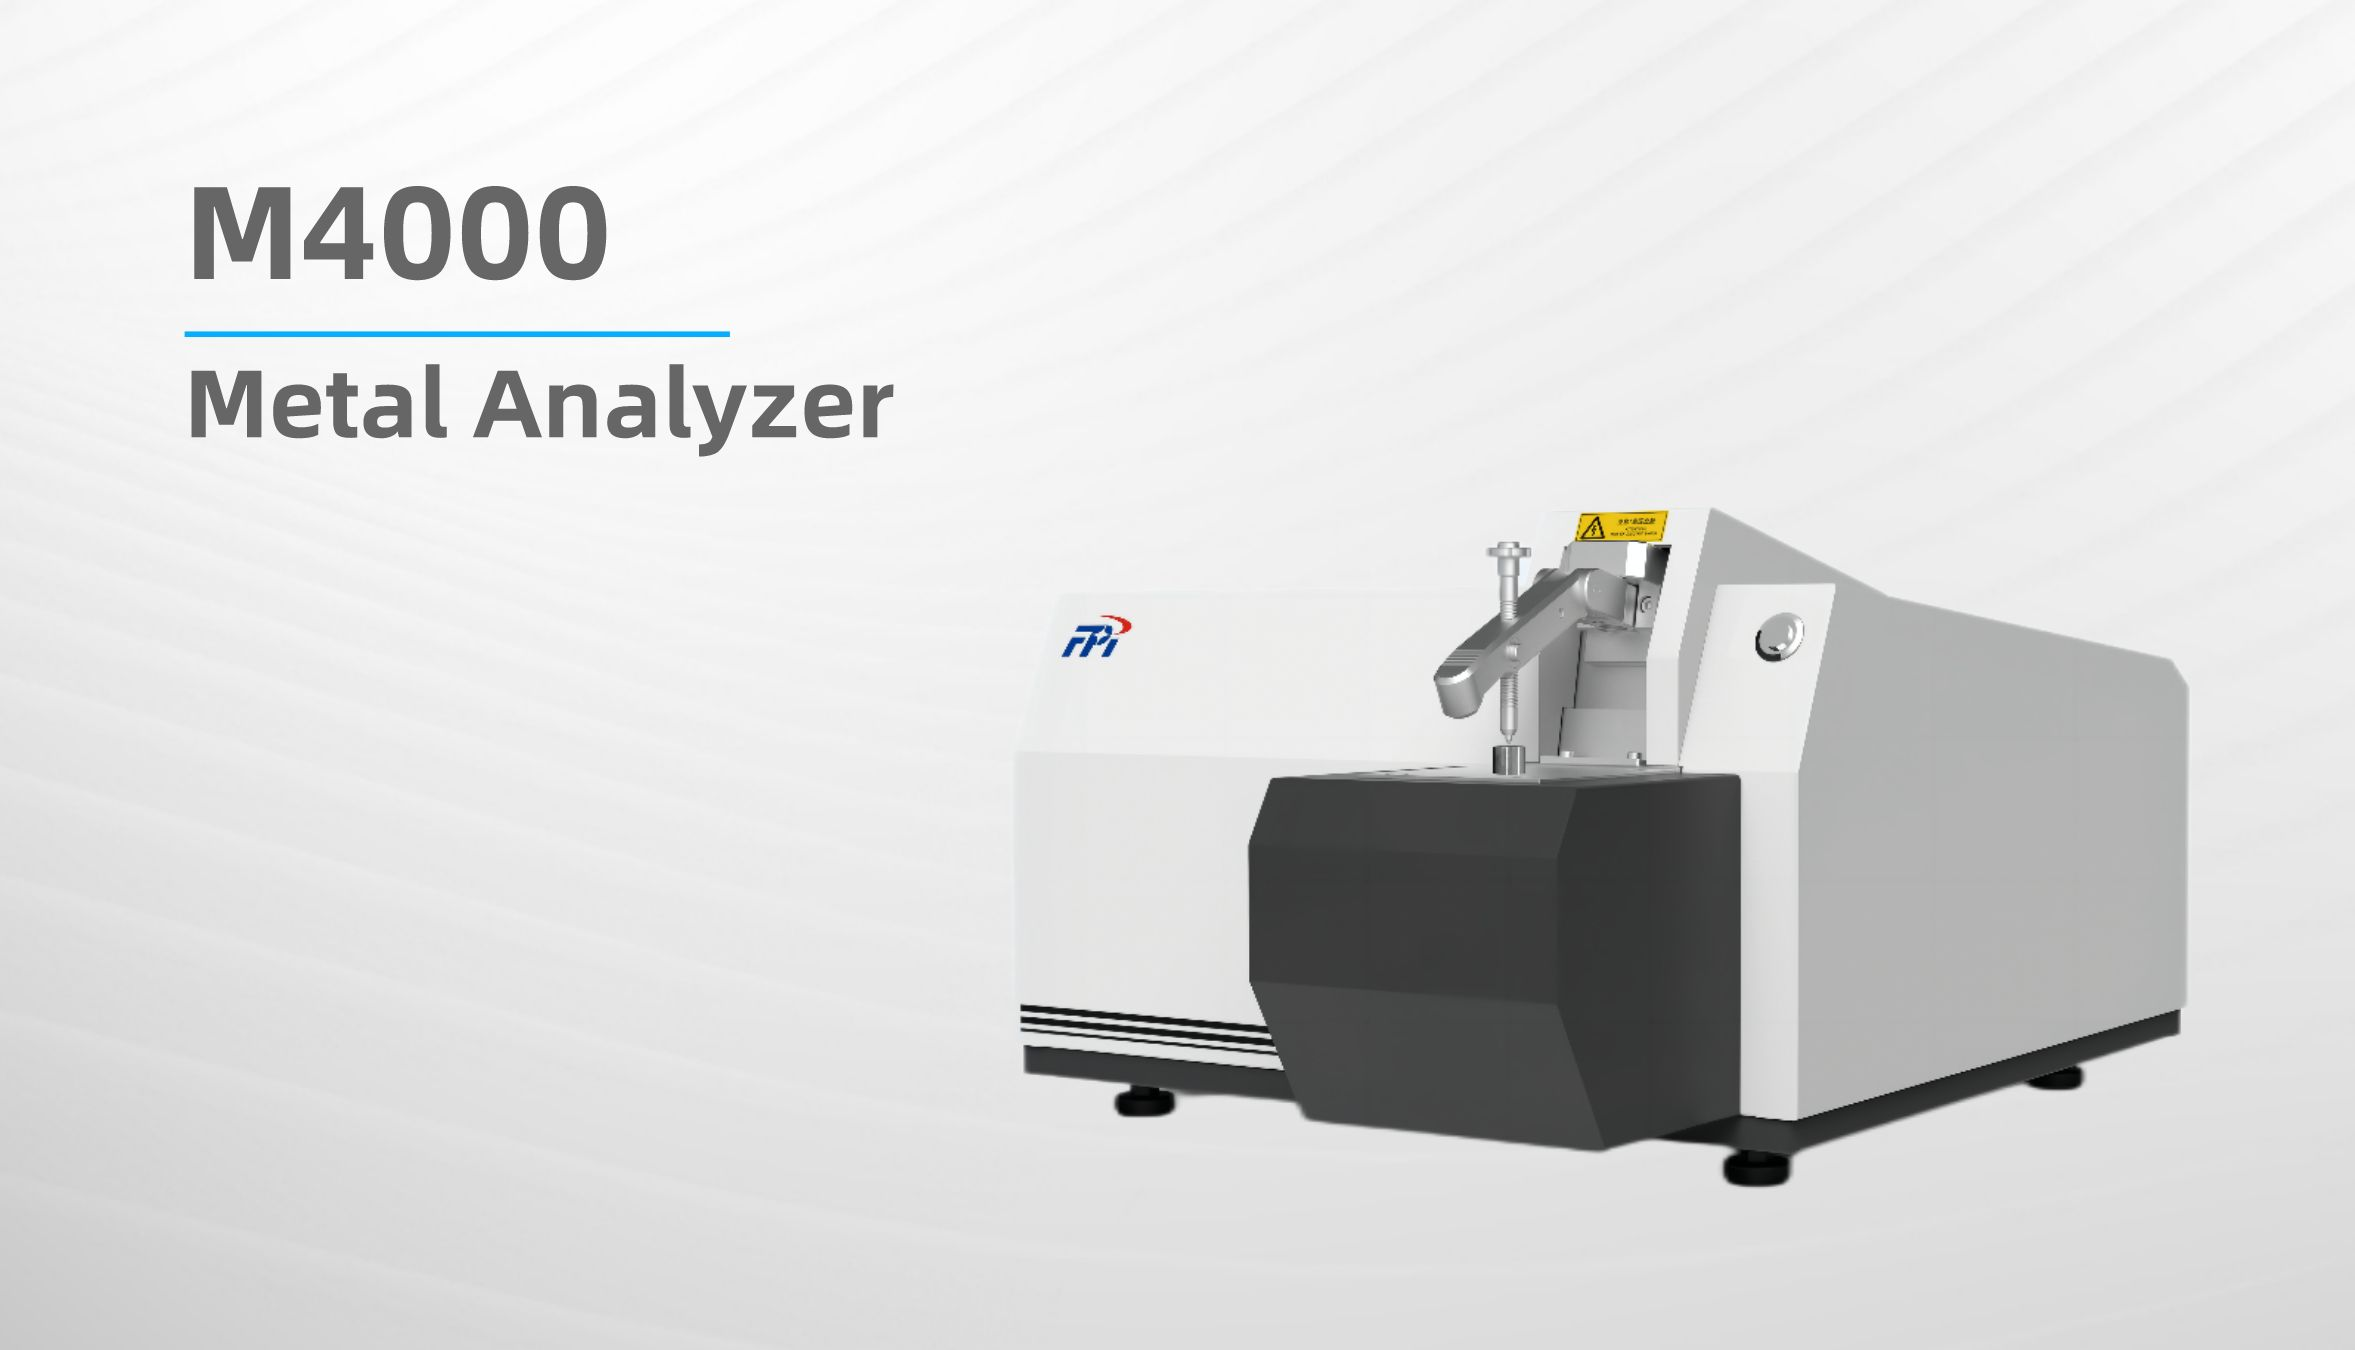 FPI's M4000 Metal Analyzer Won Gold Award in 2022 China Photoelectric Instrument Brand List！EXPEC-6500 ICP-OES Won Bronze Award！